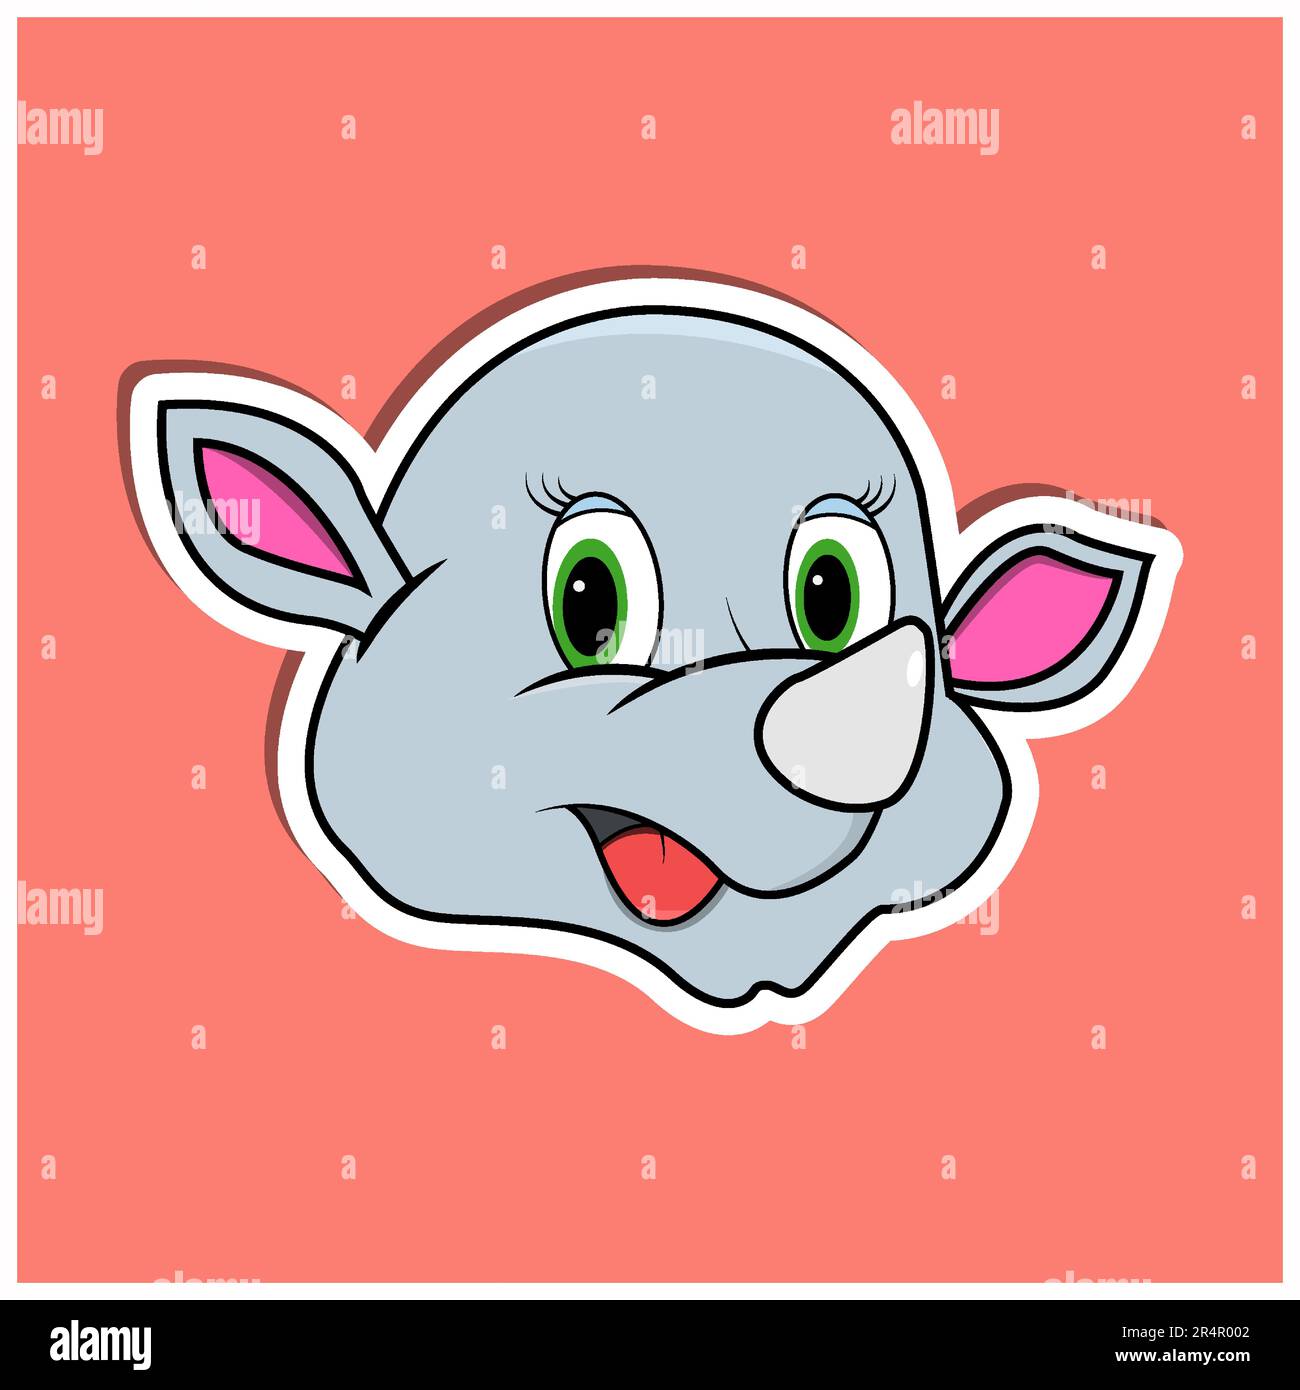 Animal Face Sticker With  Rhinoceros Character Design. Vector and Illustration Stock Vector